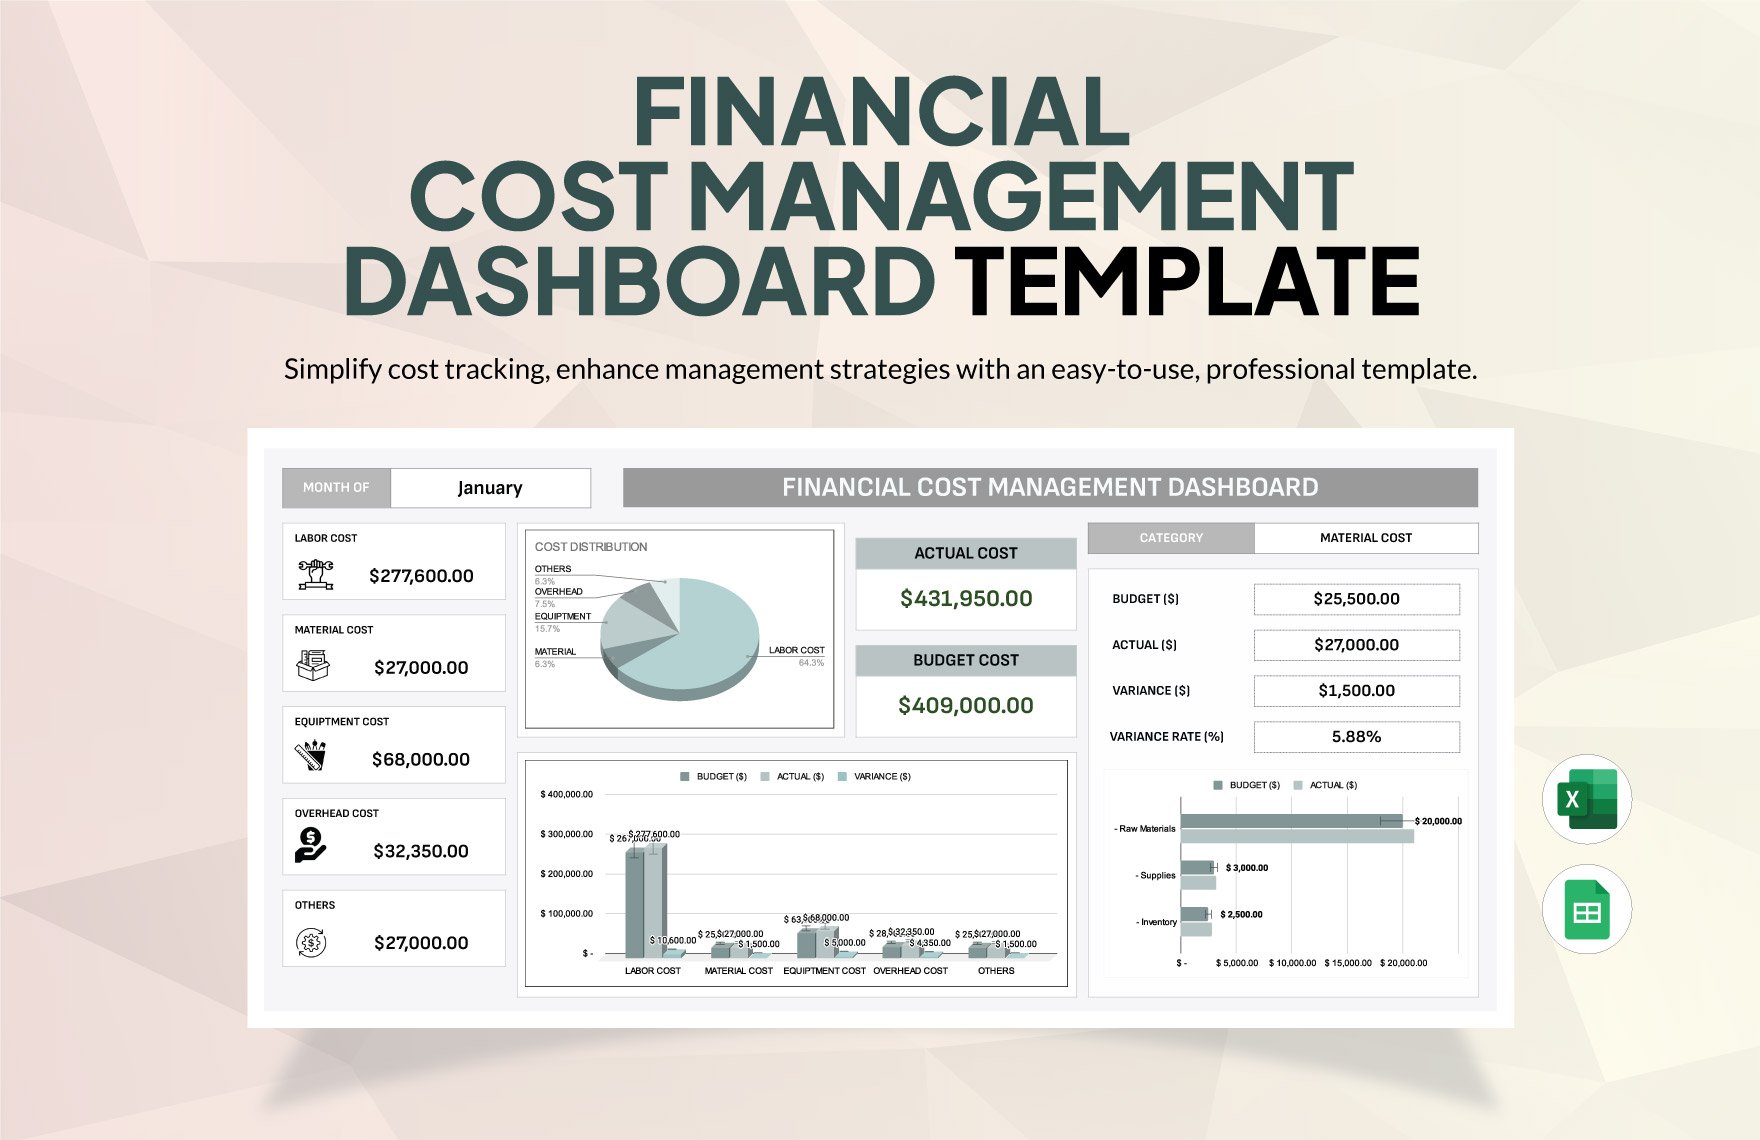 Financial Cost Management Dashboard Template in Excel, Google Sheets